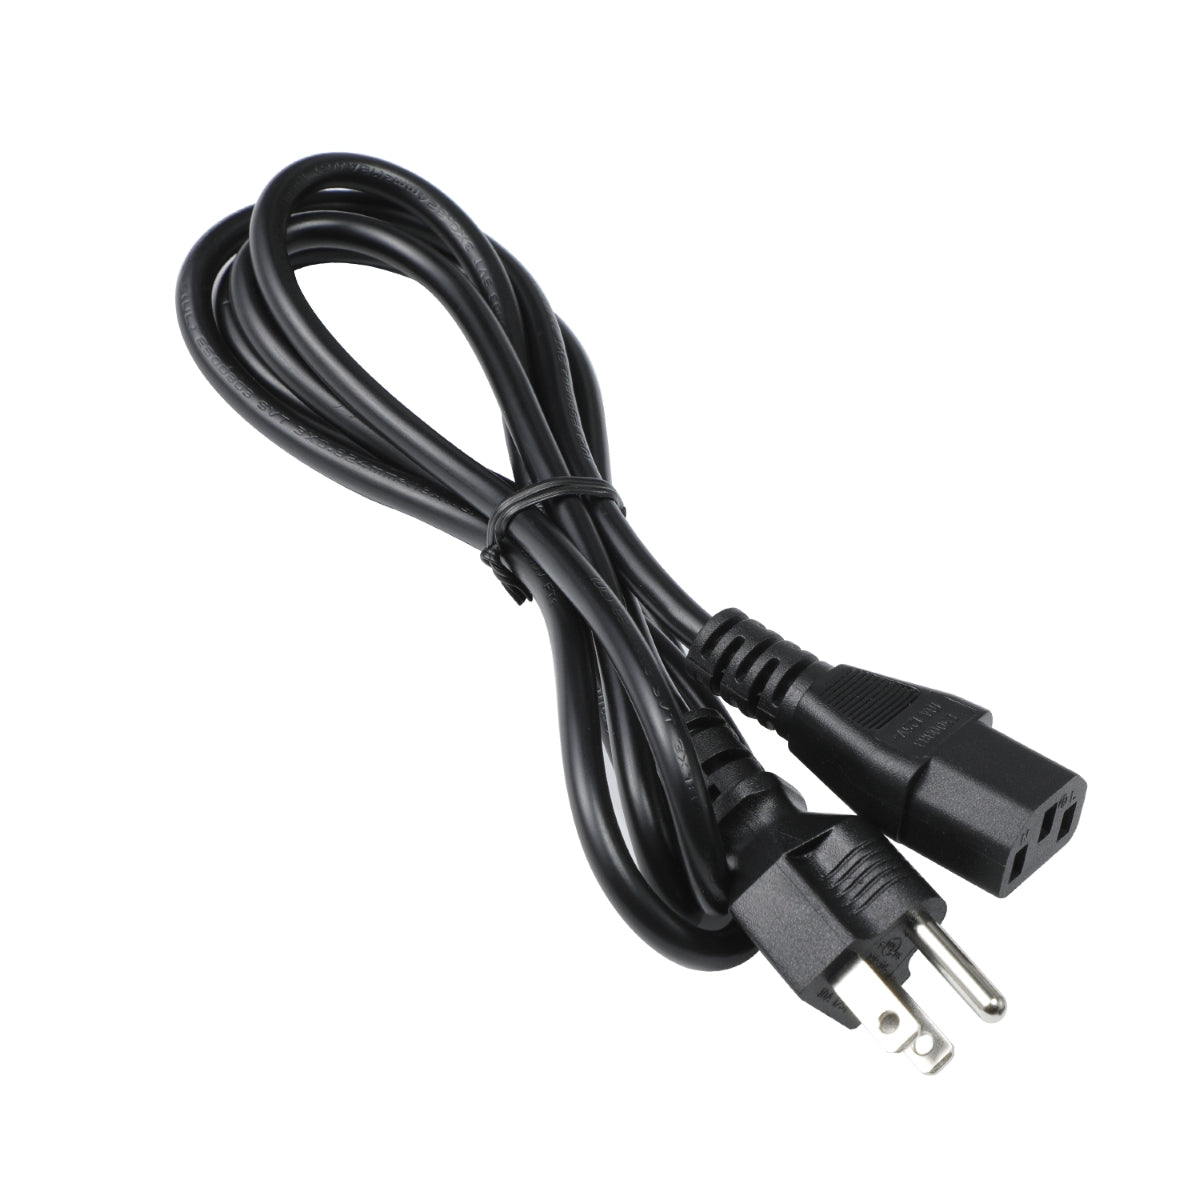 Power Cord for ViewSonic VG2753 Display